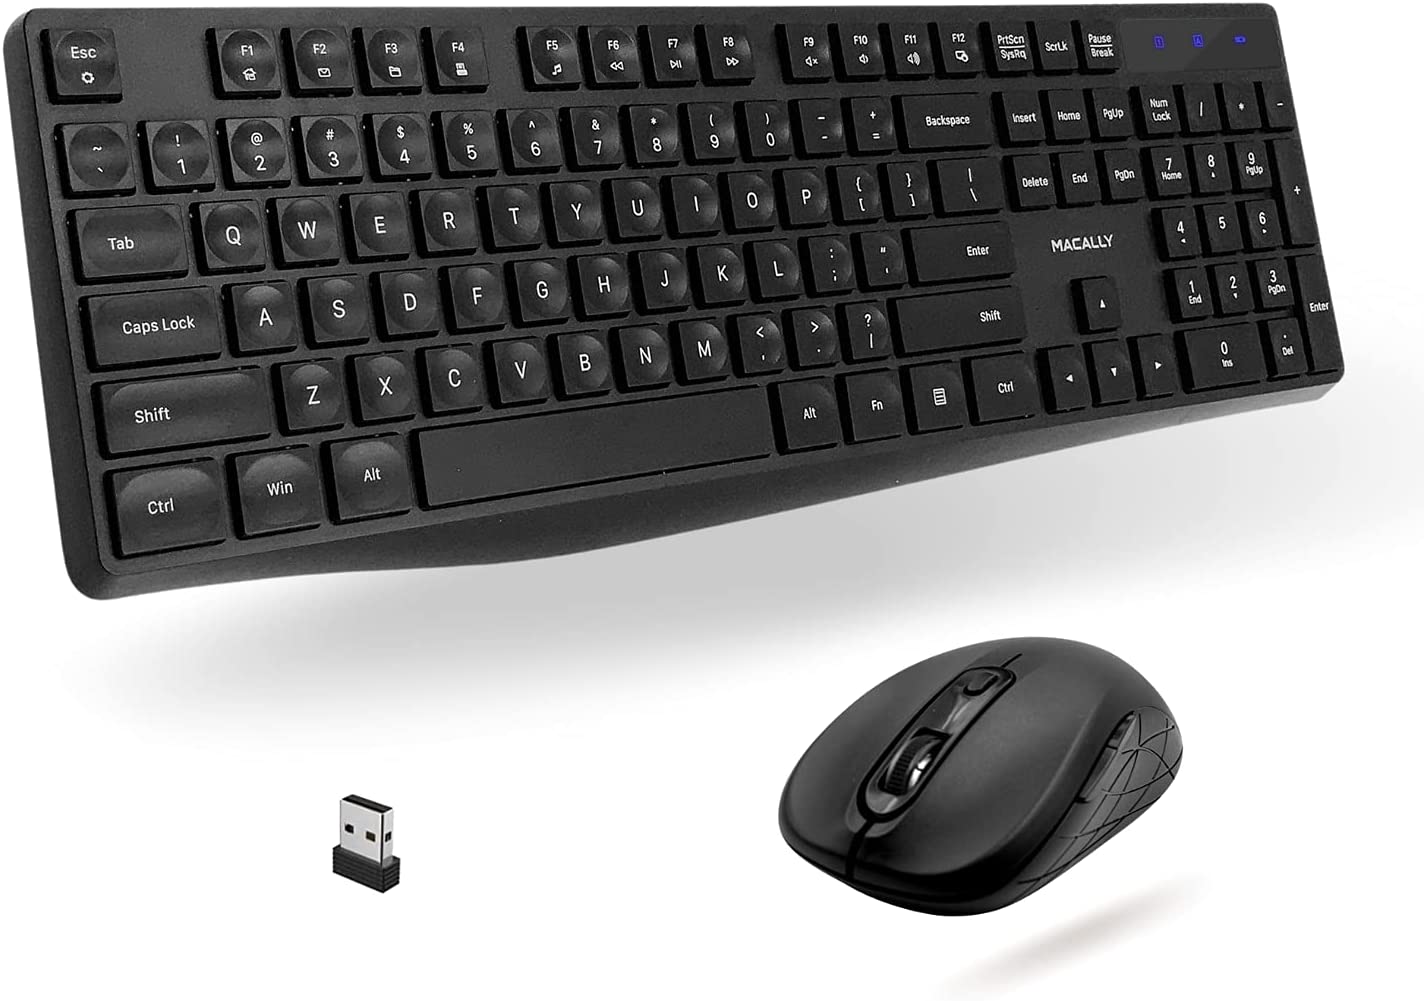 Macally USB Wireless Keyboard and Mouse Combo – 2.4Ghz Full Size Cordless Keyboard and DPI Optical Mouse – Designed for Windows PC with USB Port – Simple Plug & Play Mouse and Keyboard Combo – (Black)